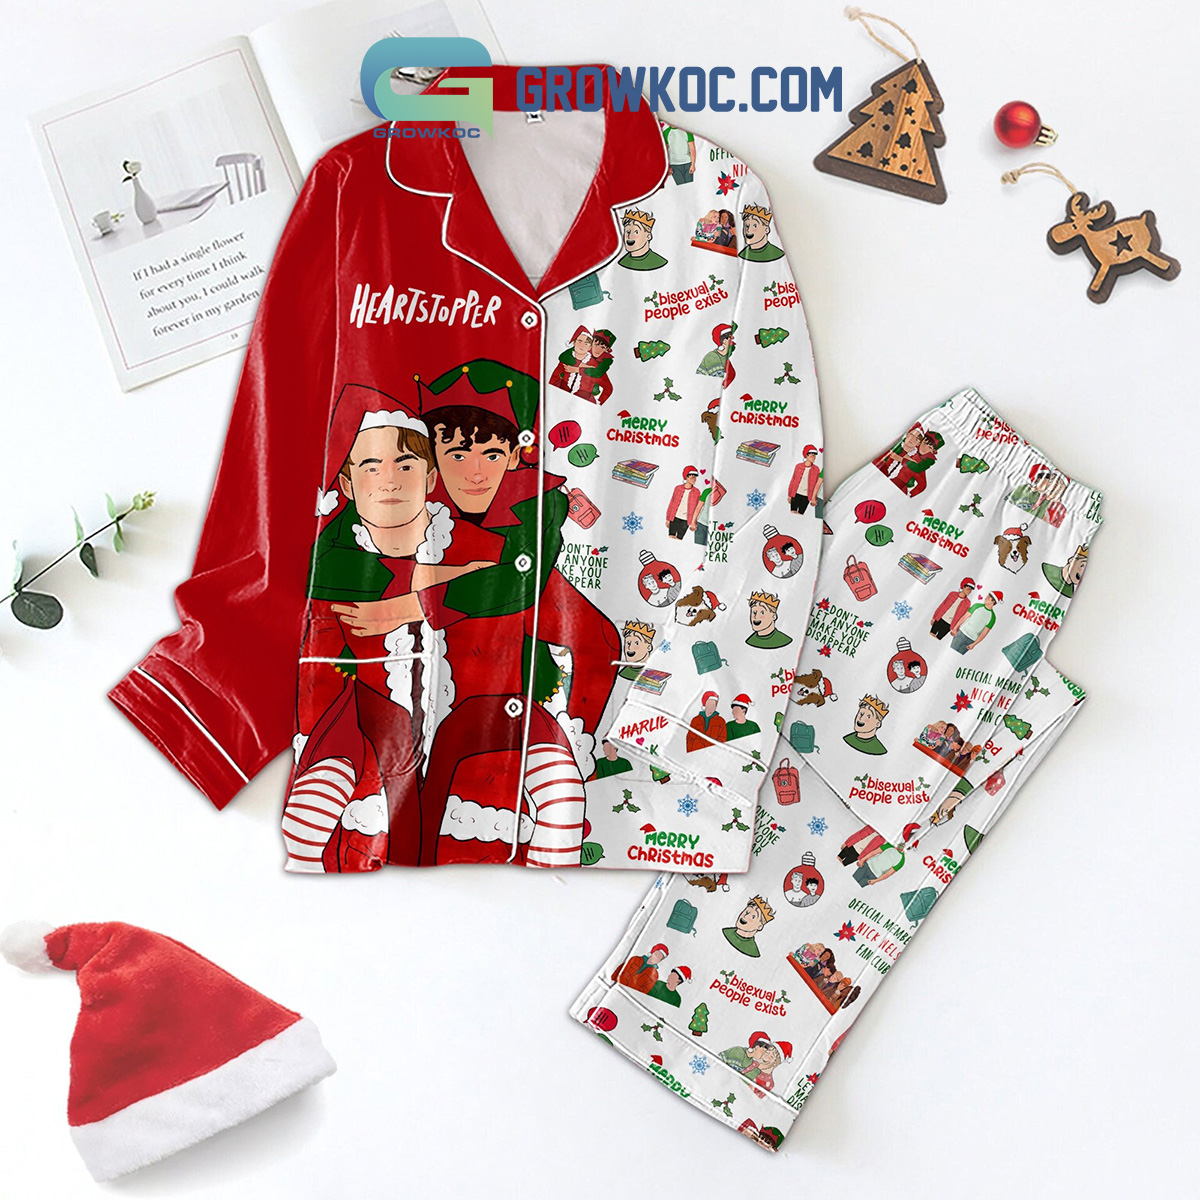 Heartstopper Merry Christmas Bisexual People Exist Pajamas Sets